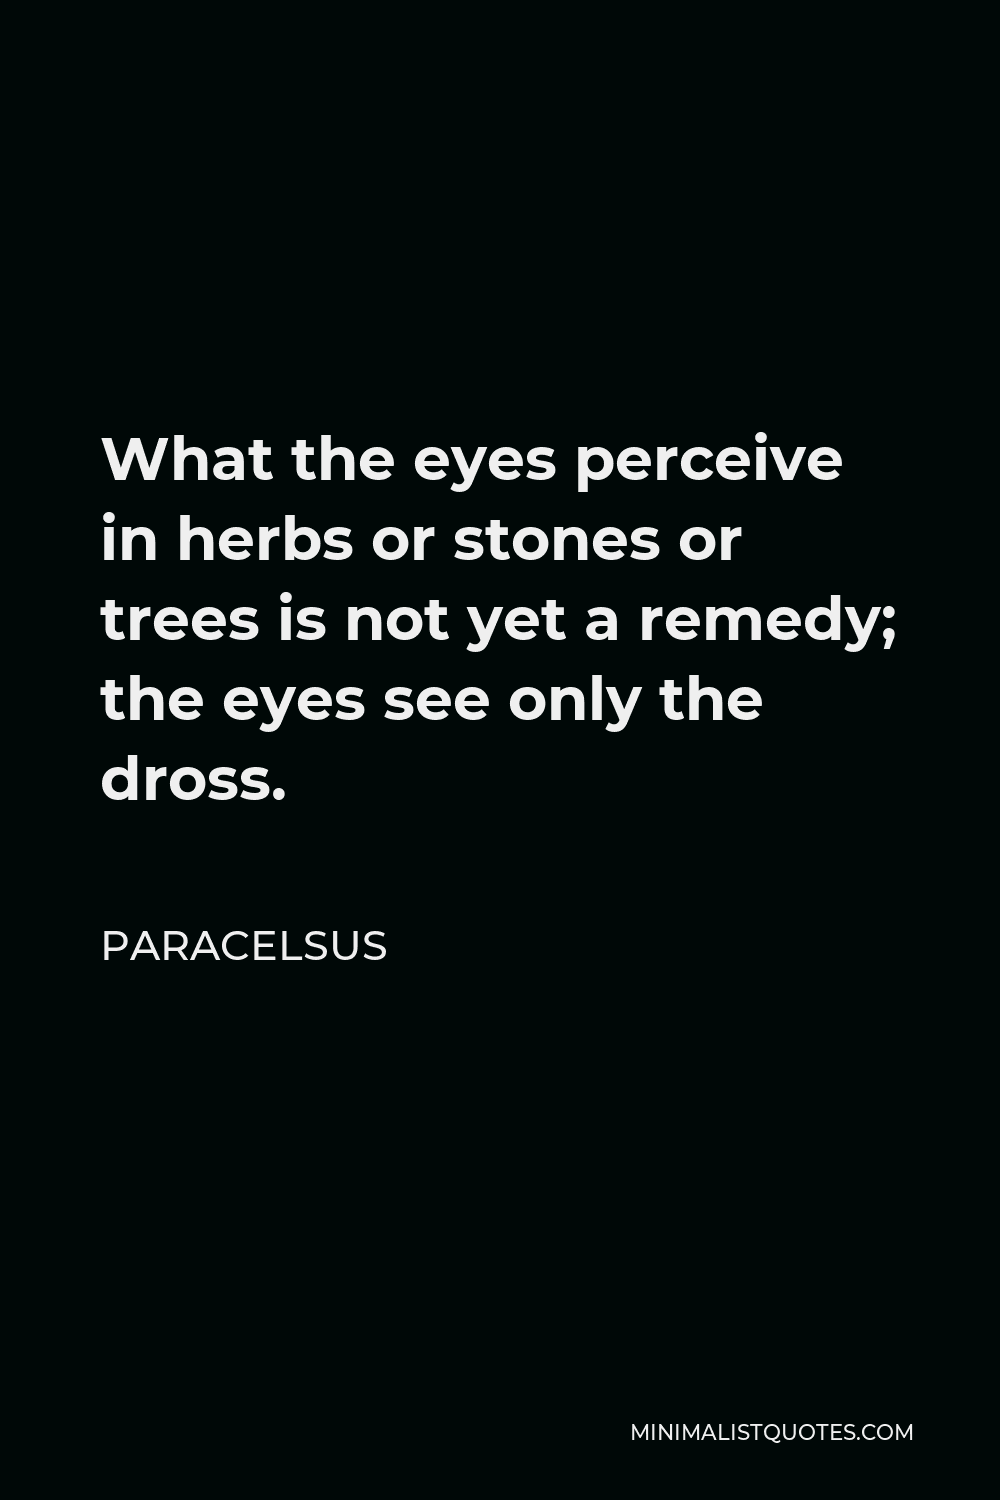 Paracelsus Quote - What the eyes perceive in herbs or stones or trees is not yet a remedy; the eyes see only the dross.